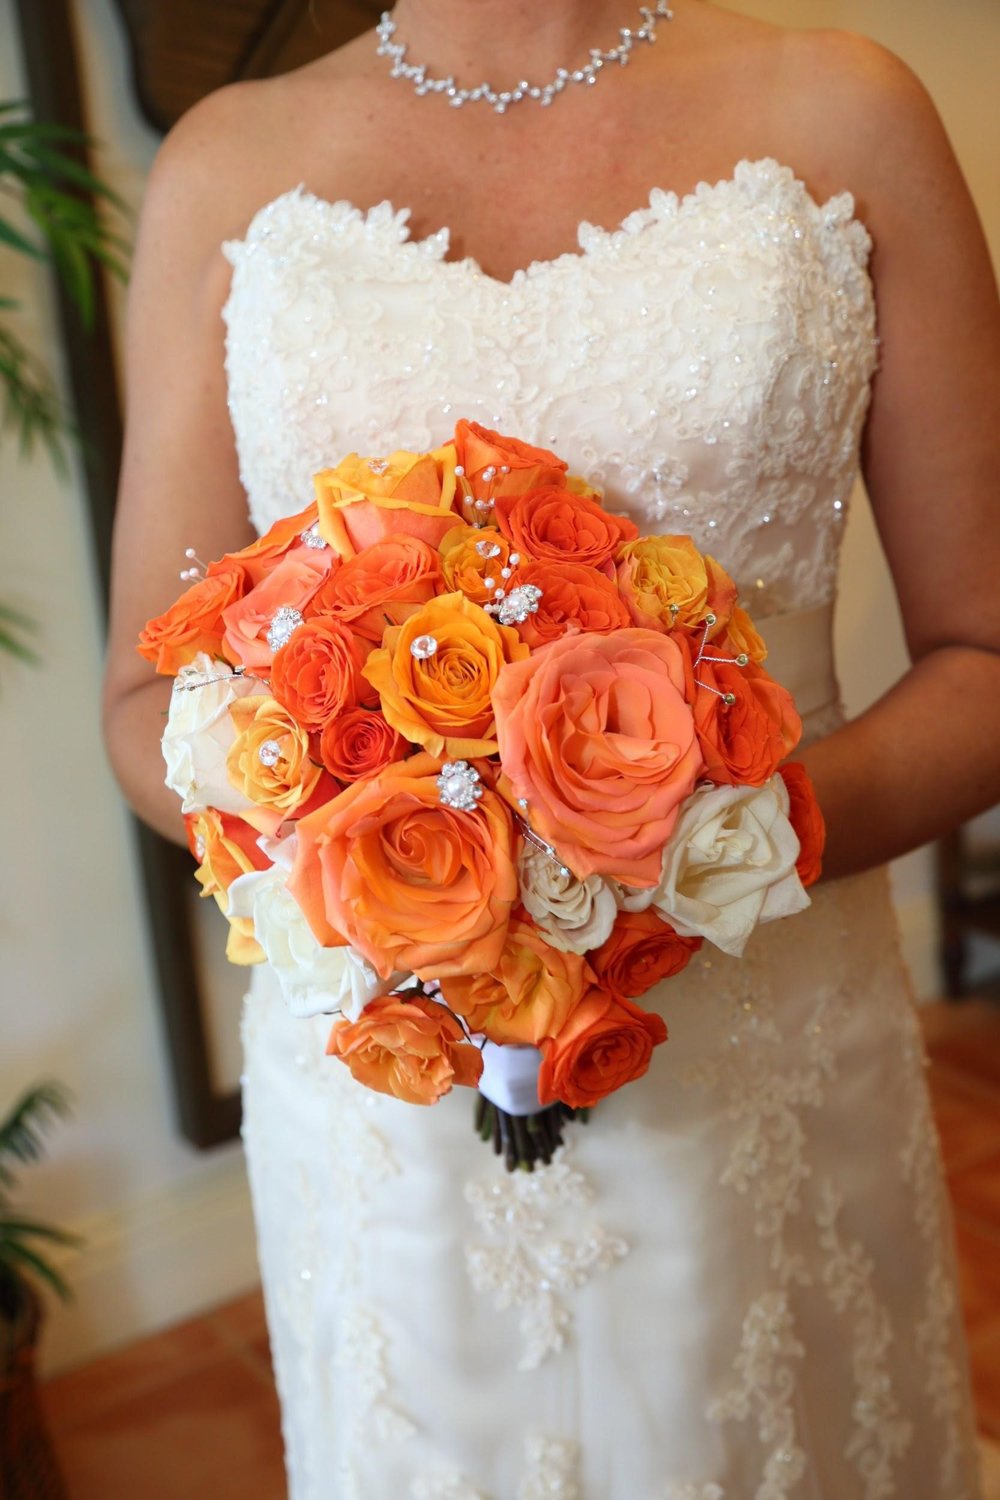 Lush peach and white roses with rhinestone accents for the bride